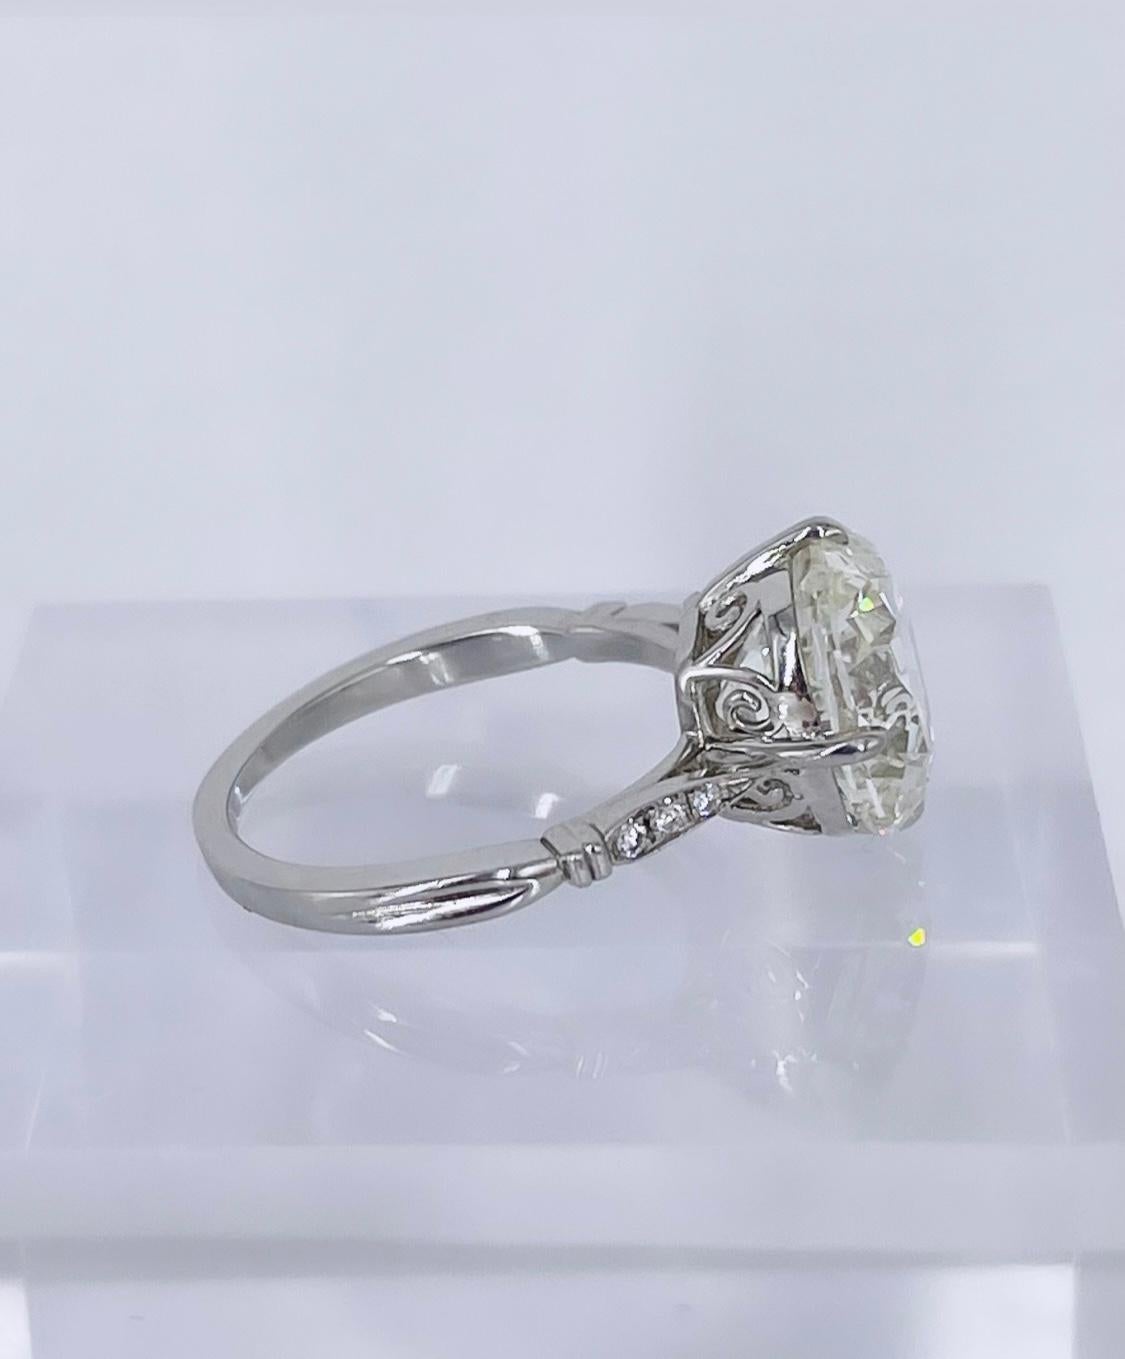 Perfect for the romantic in your life, this gorgeous engagement ring by J. Birnbach features a rare 5.01 carat antique cushion brilliant diamond. The larger faceting and distinct cutting style give this diamond a beautiful lively sparkle. It is